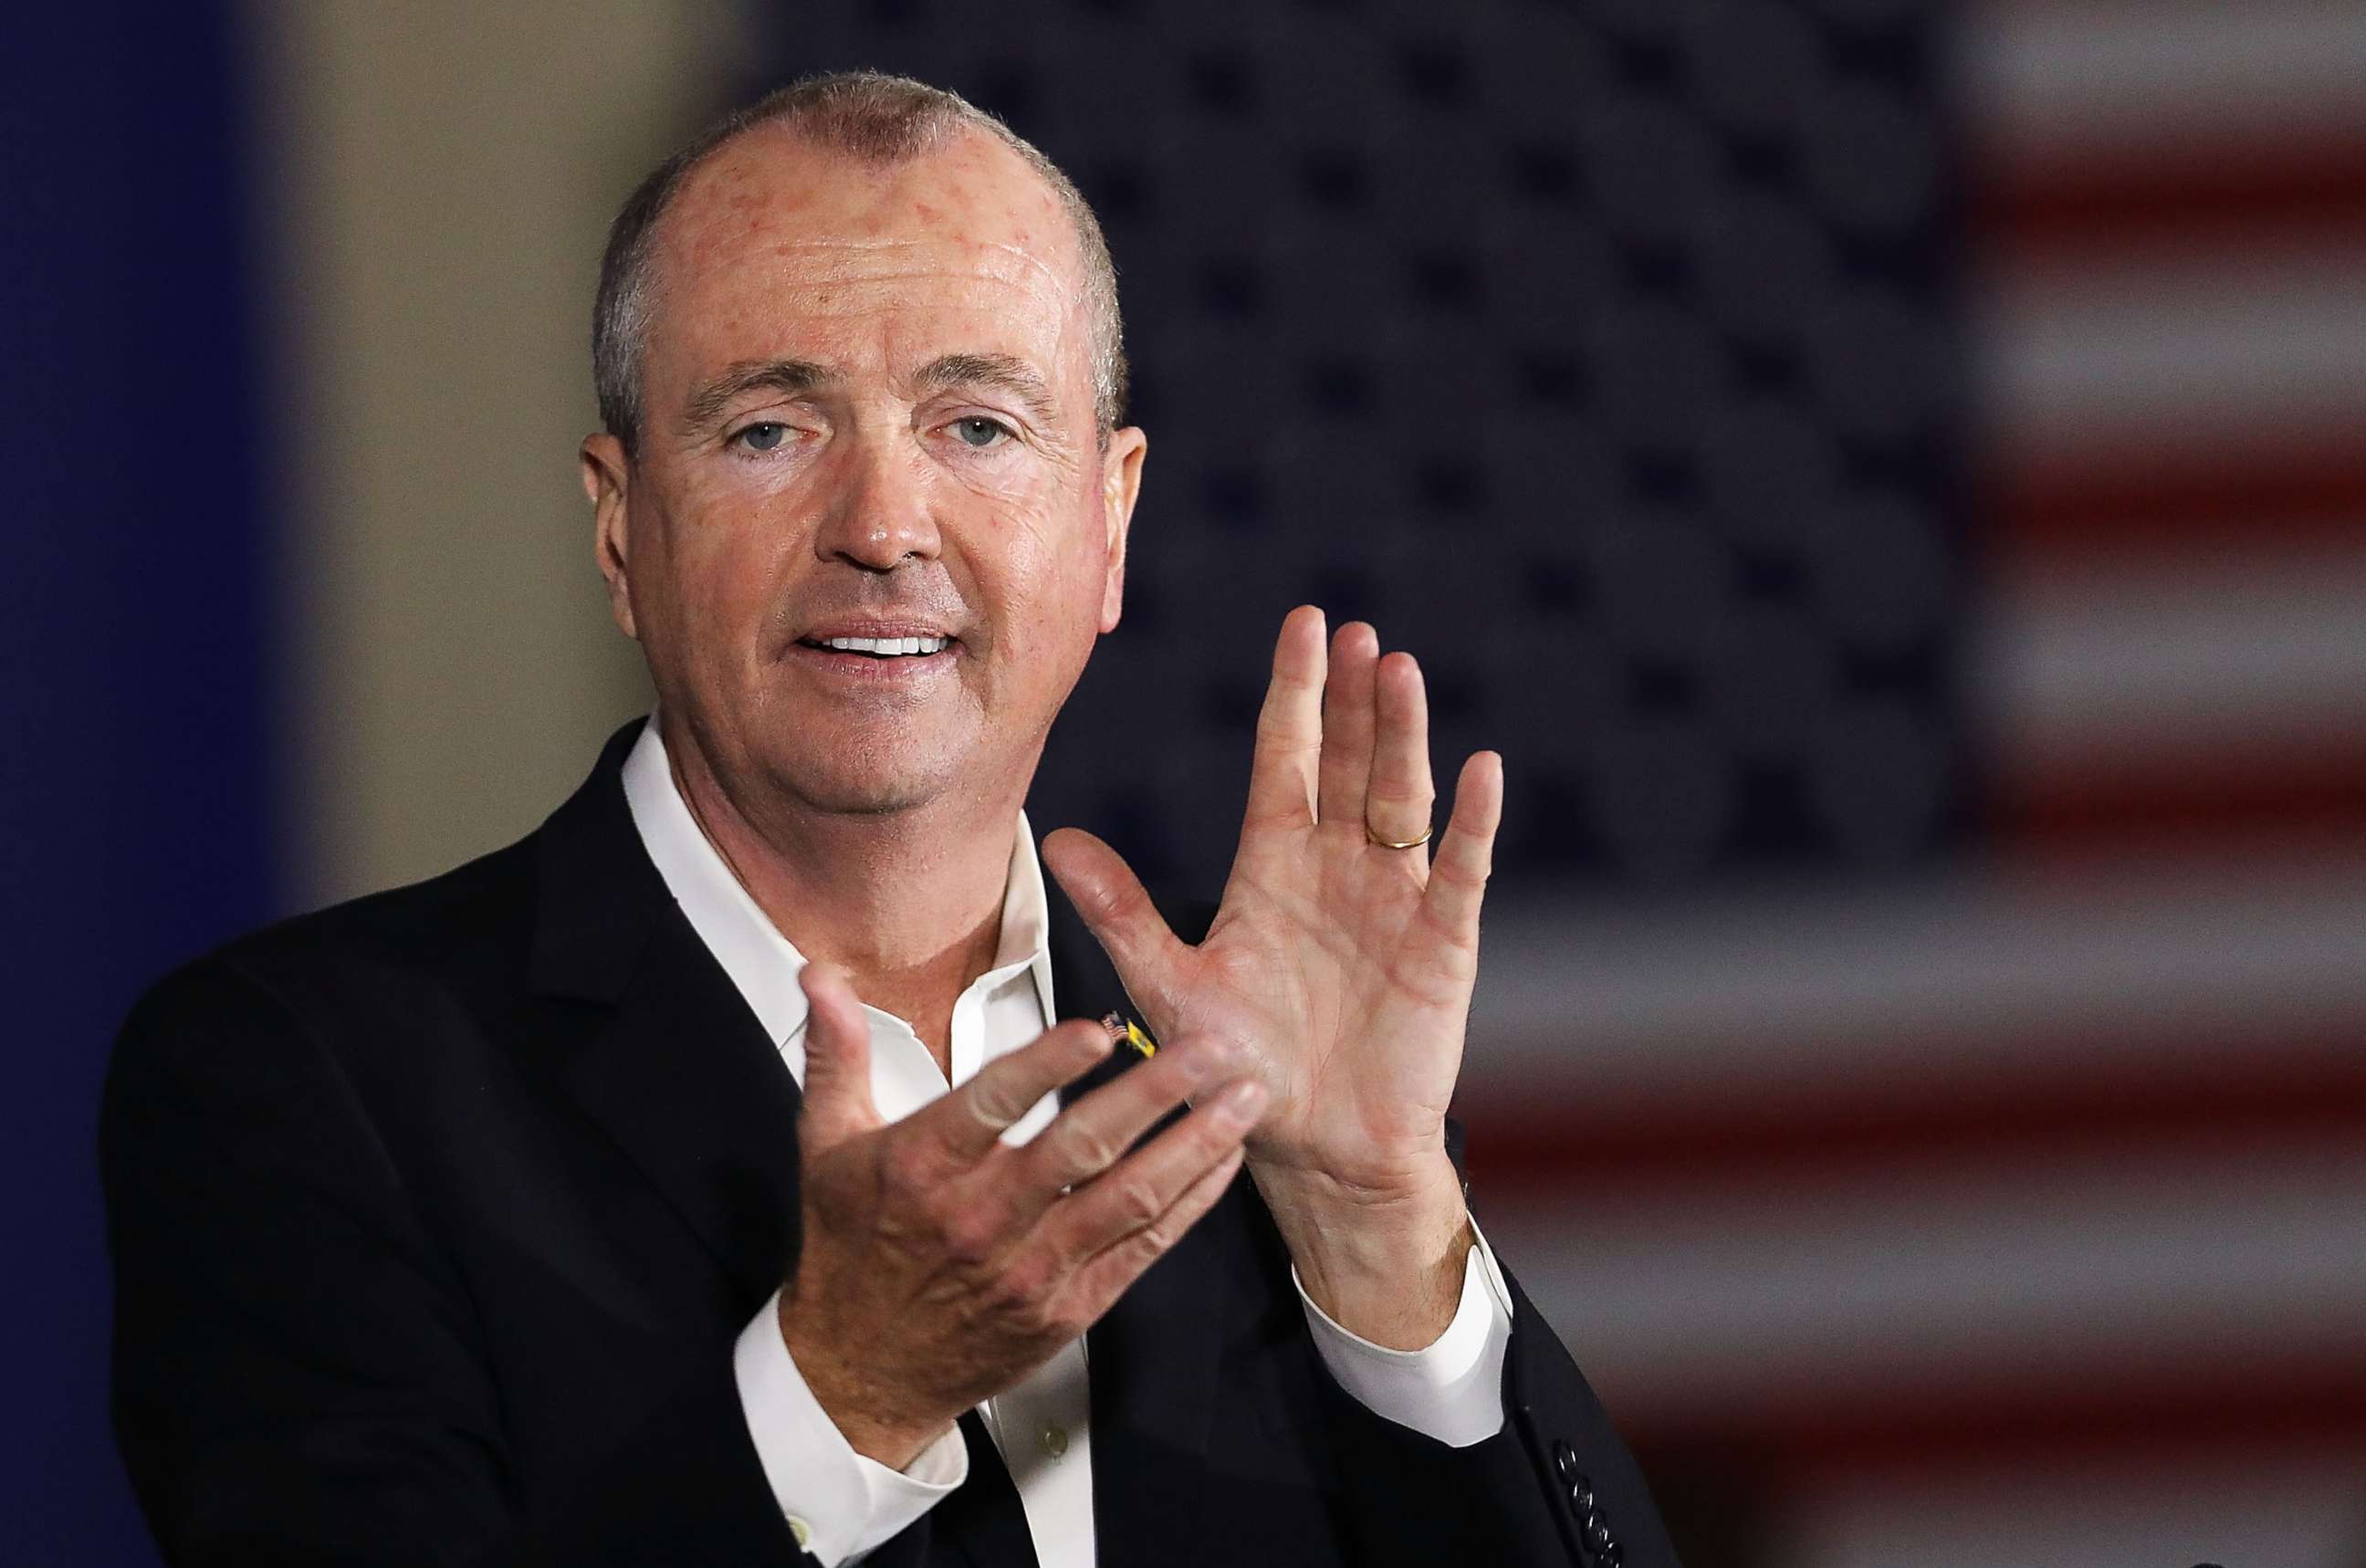 PHOTO: Democratic candidate Phil Murphy, who is running against Republican Lt. Gov. Kim Guadagno for the governor of New Jersey, speaks at a rally on Oct. 19, 2017, in Newark, N.J.